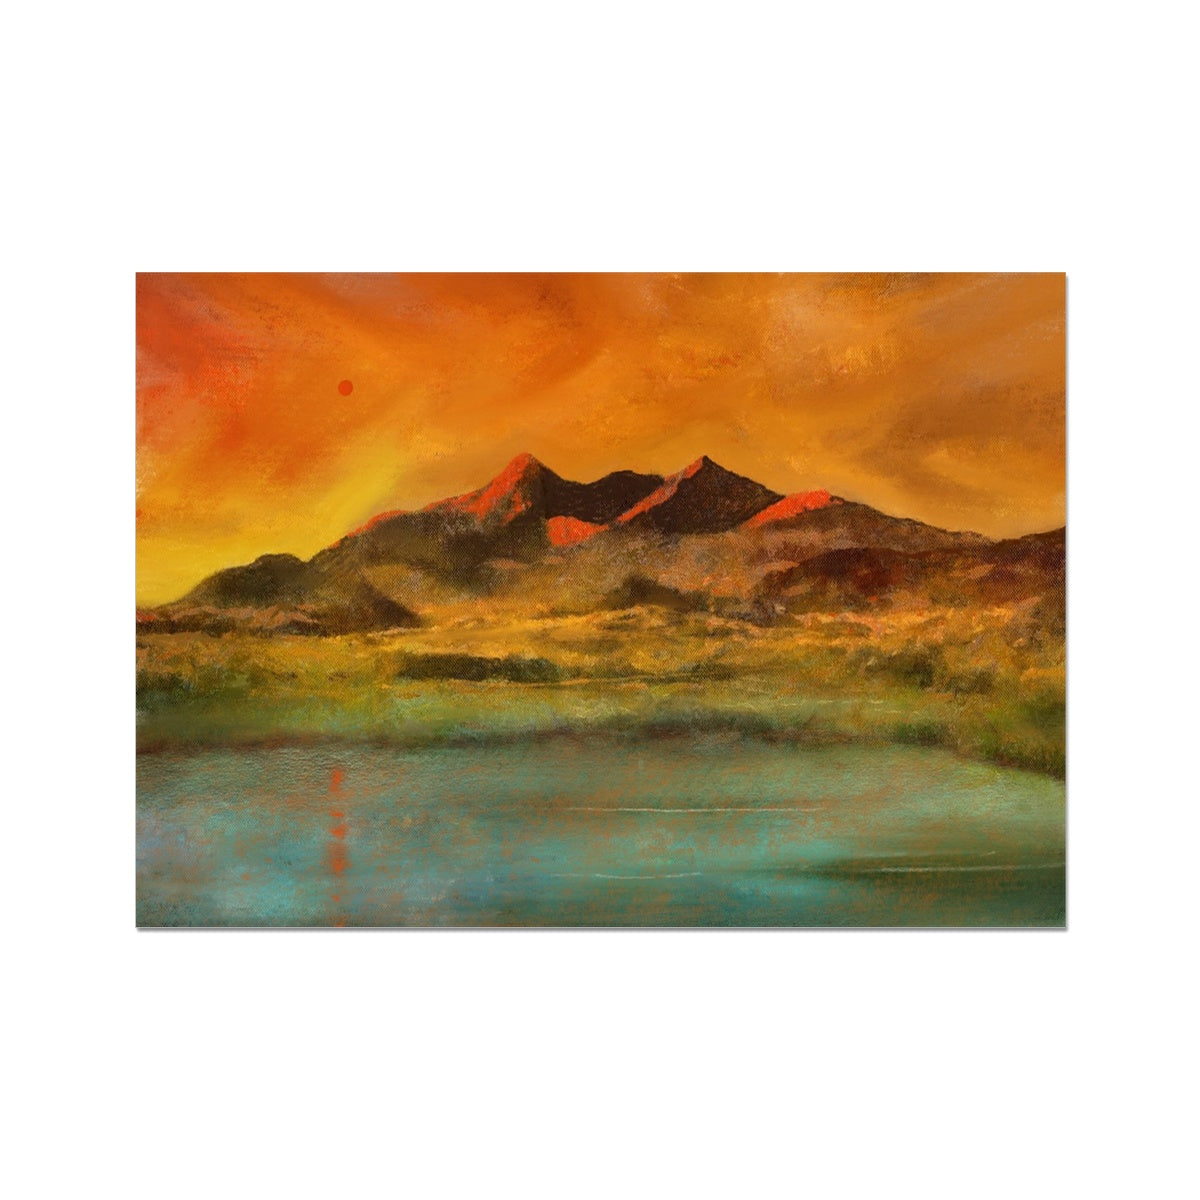 Skye Red Moon Cuillin Painting | Fine Art Prints From Scotland-Unframed Prints-Skye Art Gallery-A2 Landscape-Paintings, Prints, Homeware, Art Gifts From Scotland By Scottish Artist Kevin Hunter